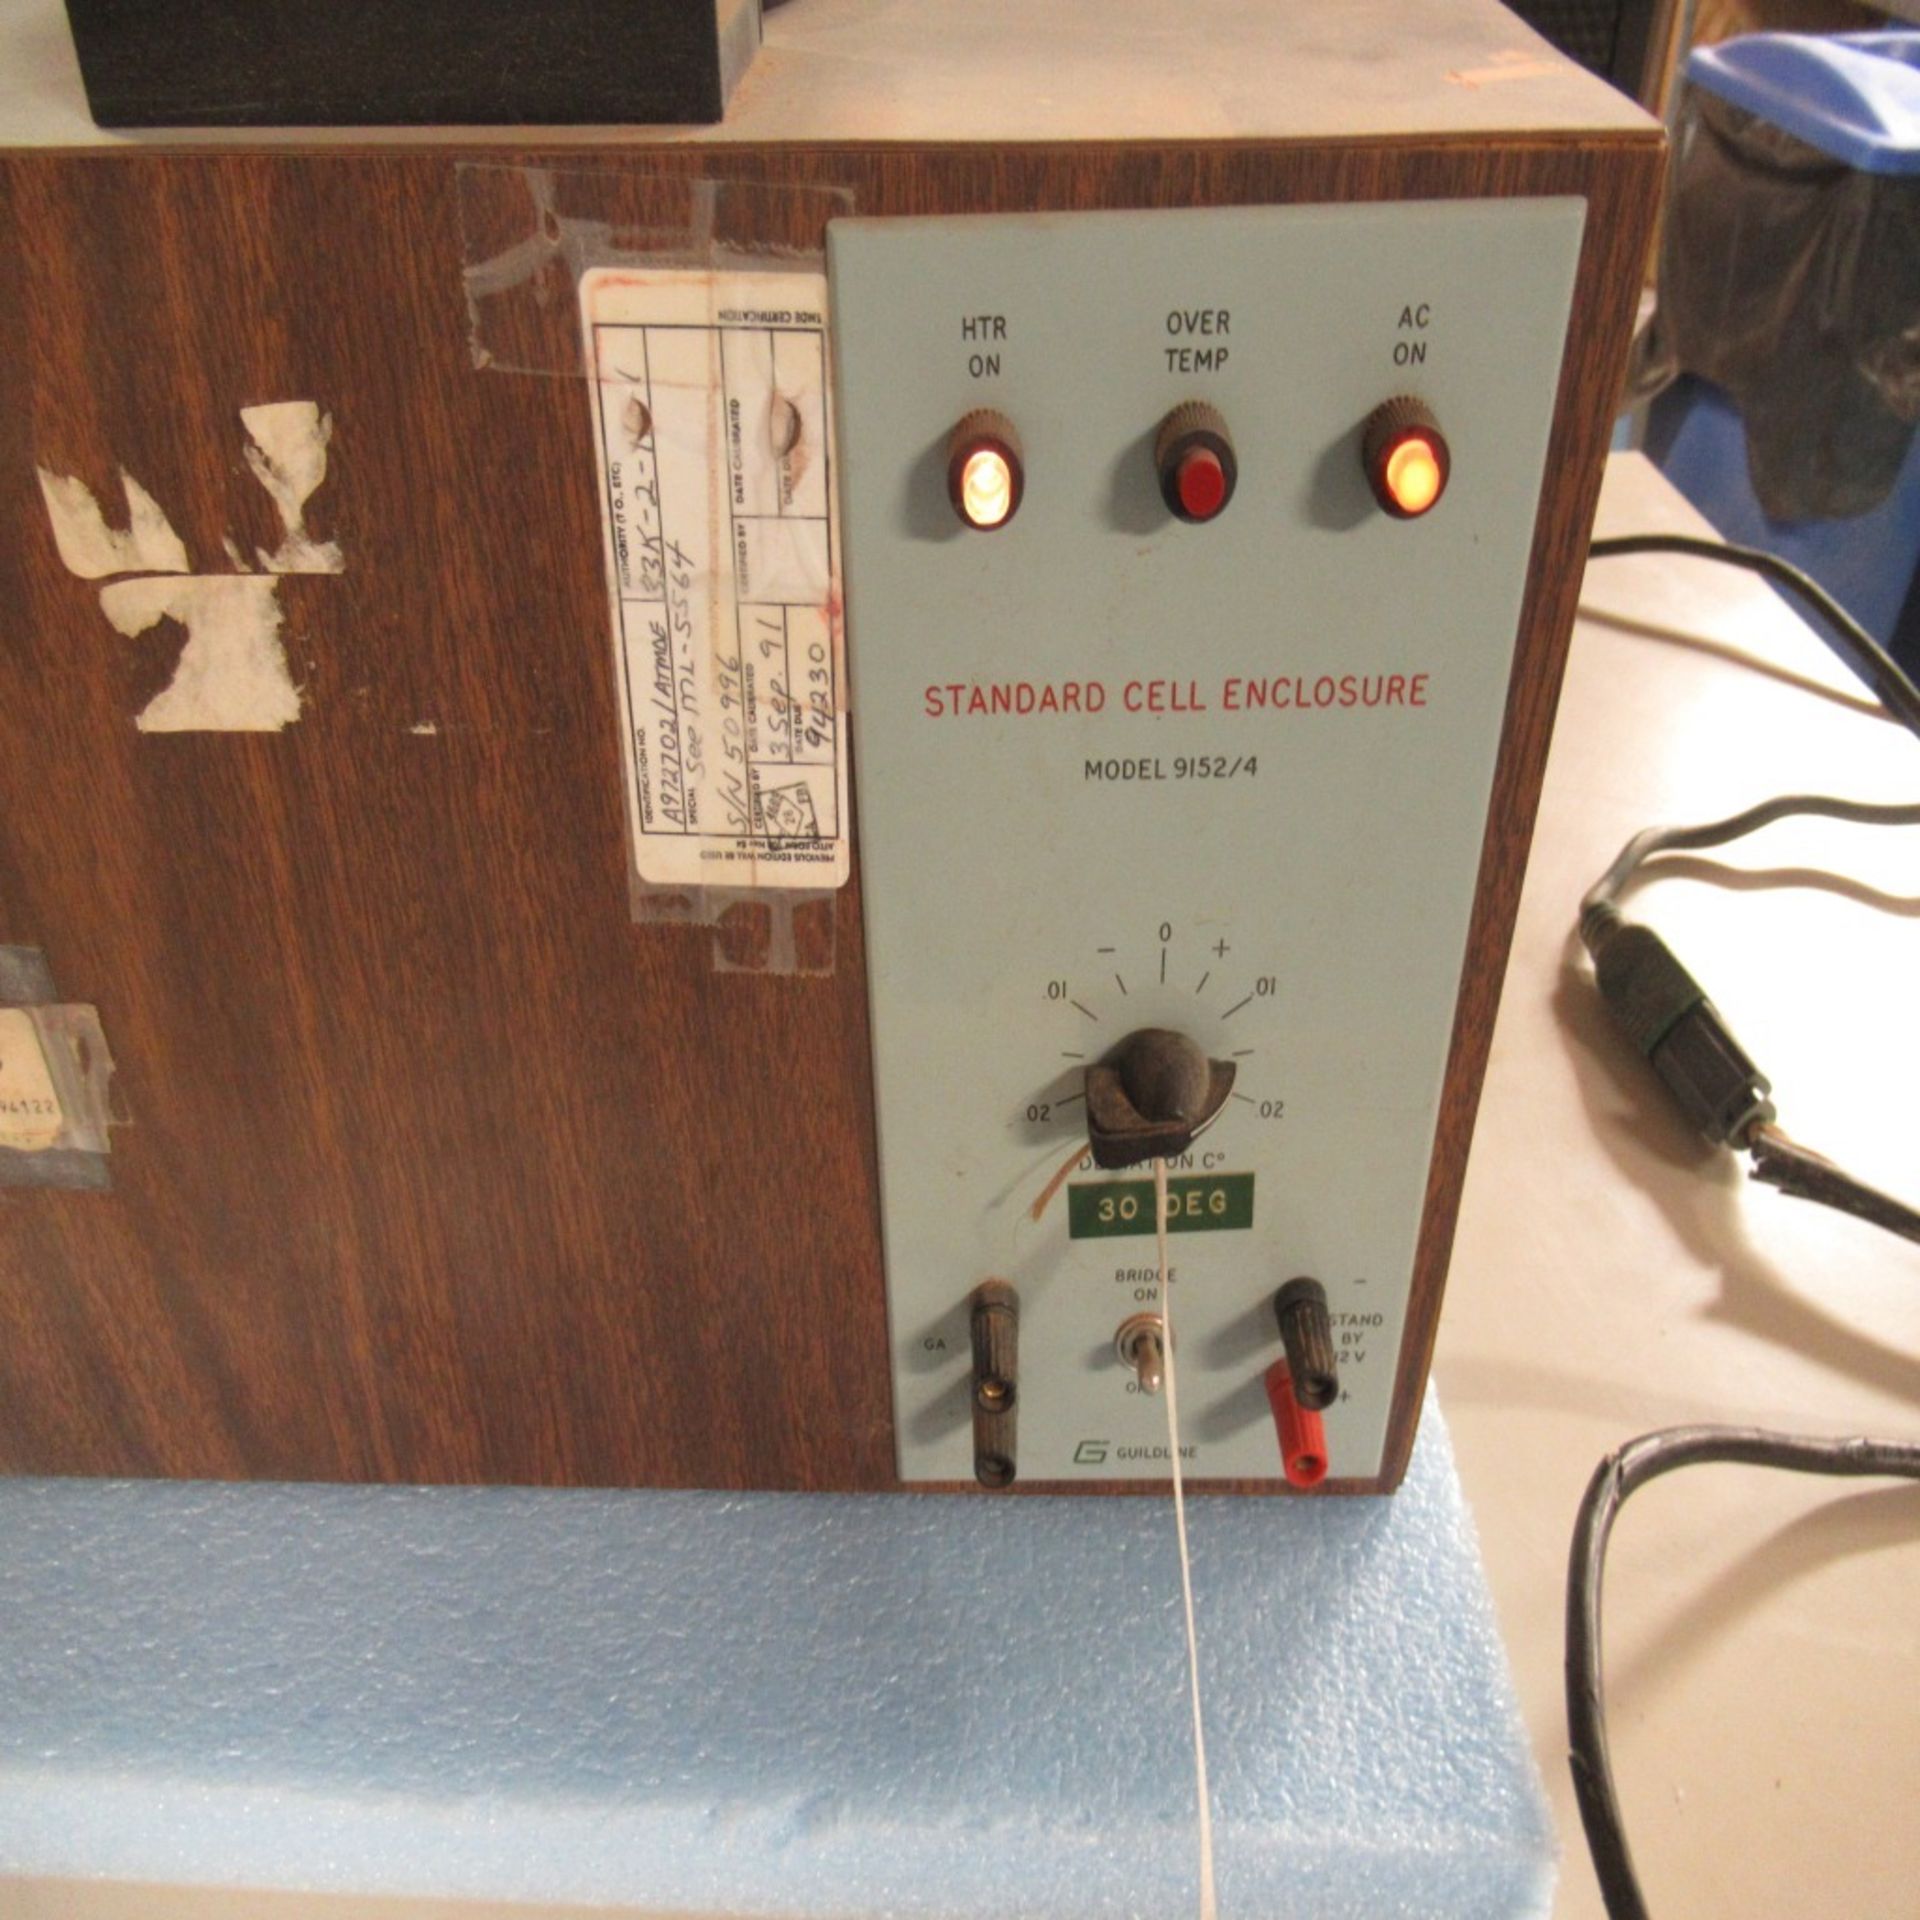 PHOTON SNAP SHOT MODEL 6000 *POWERS ON* NO SCREEN DISPLAY; FARNELL AP20-80 REGULATED POWER SUPPLY * - Image 55 of 222